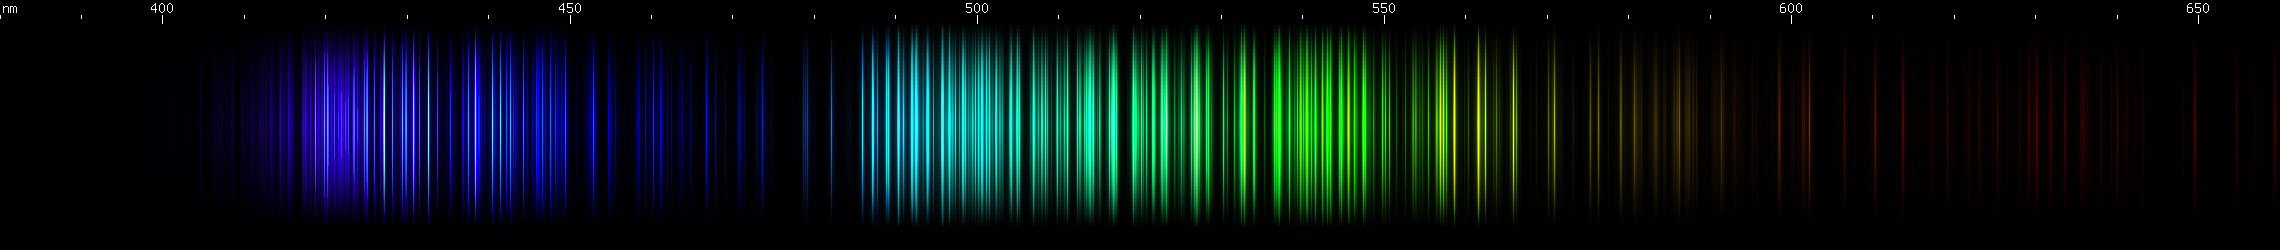 Spectral lines of Iron.